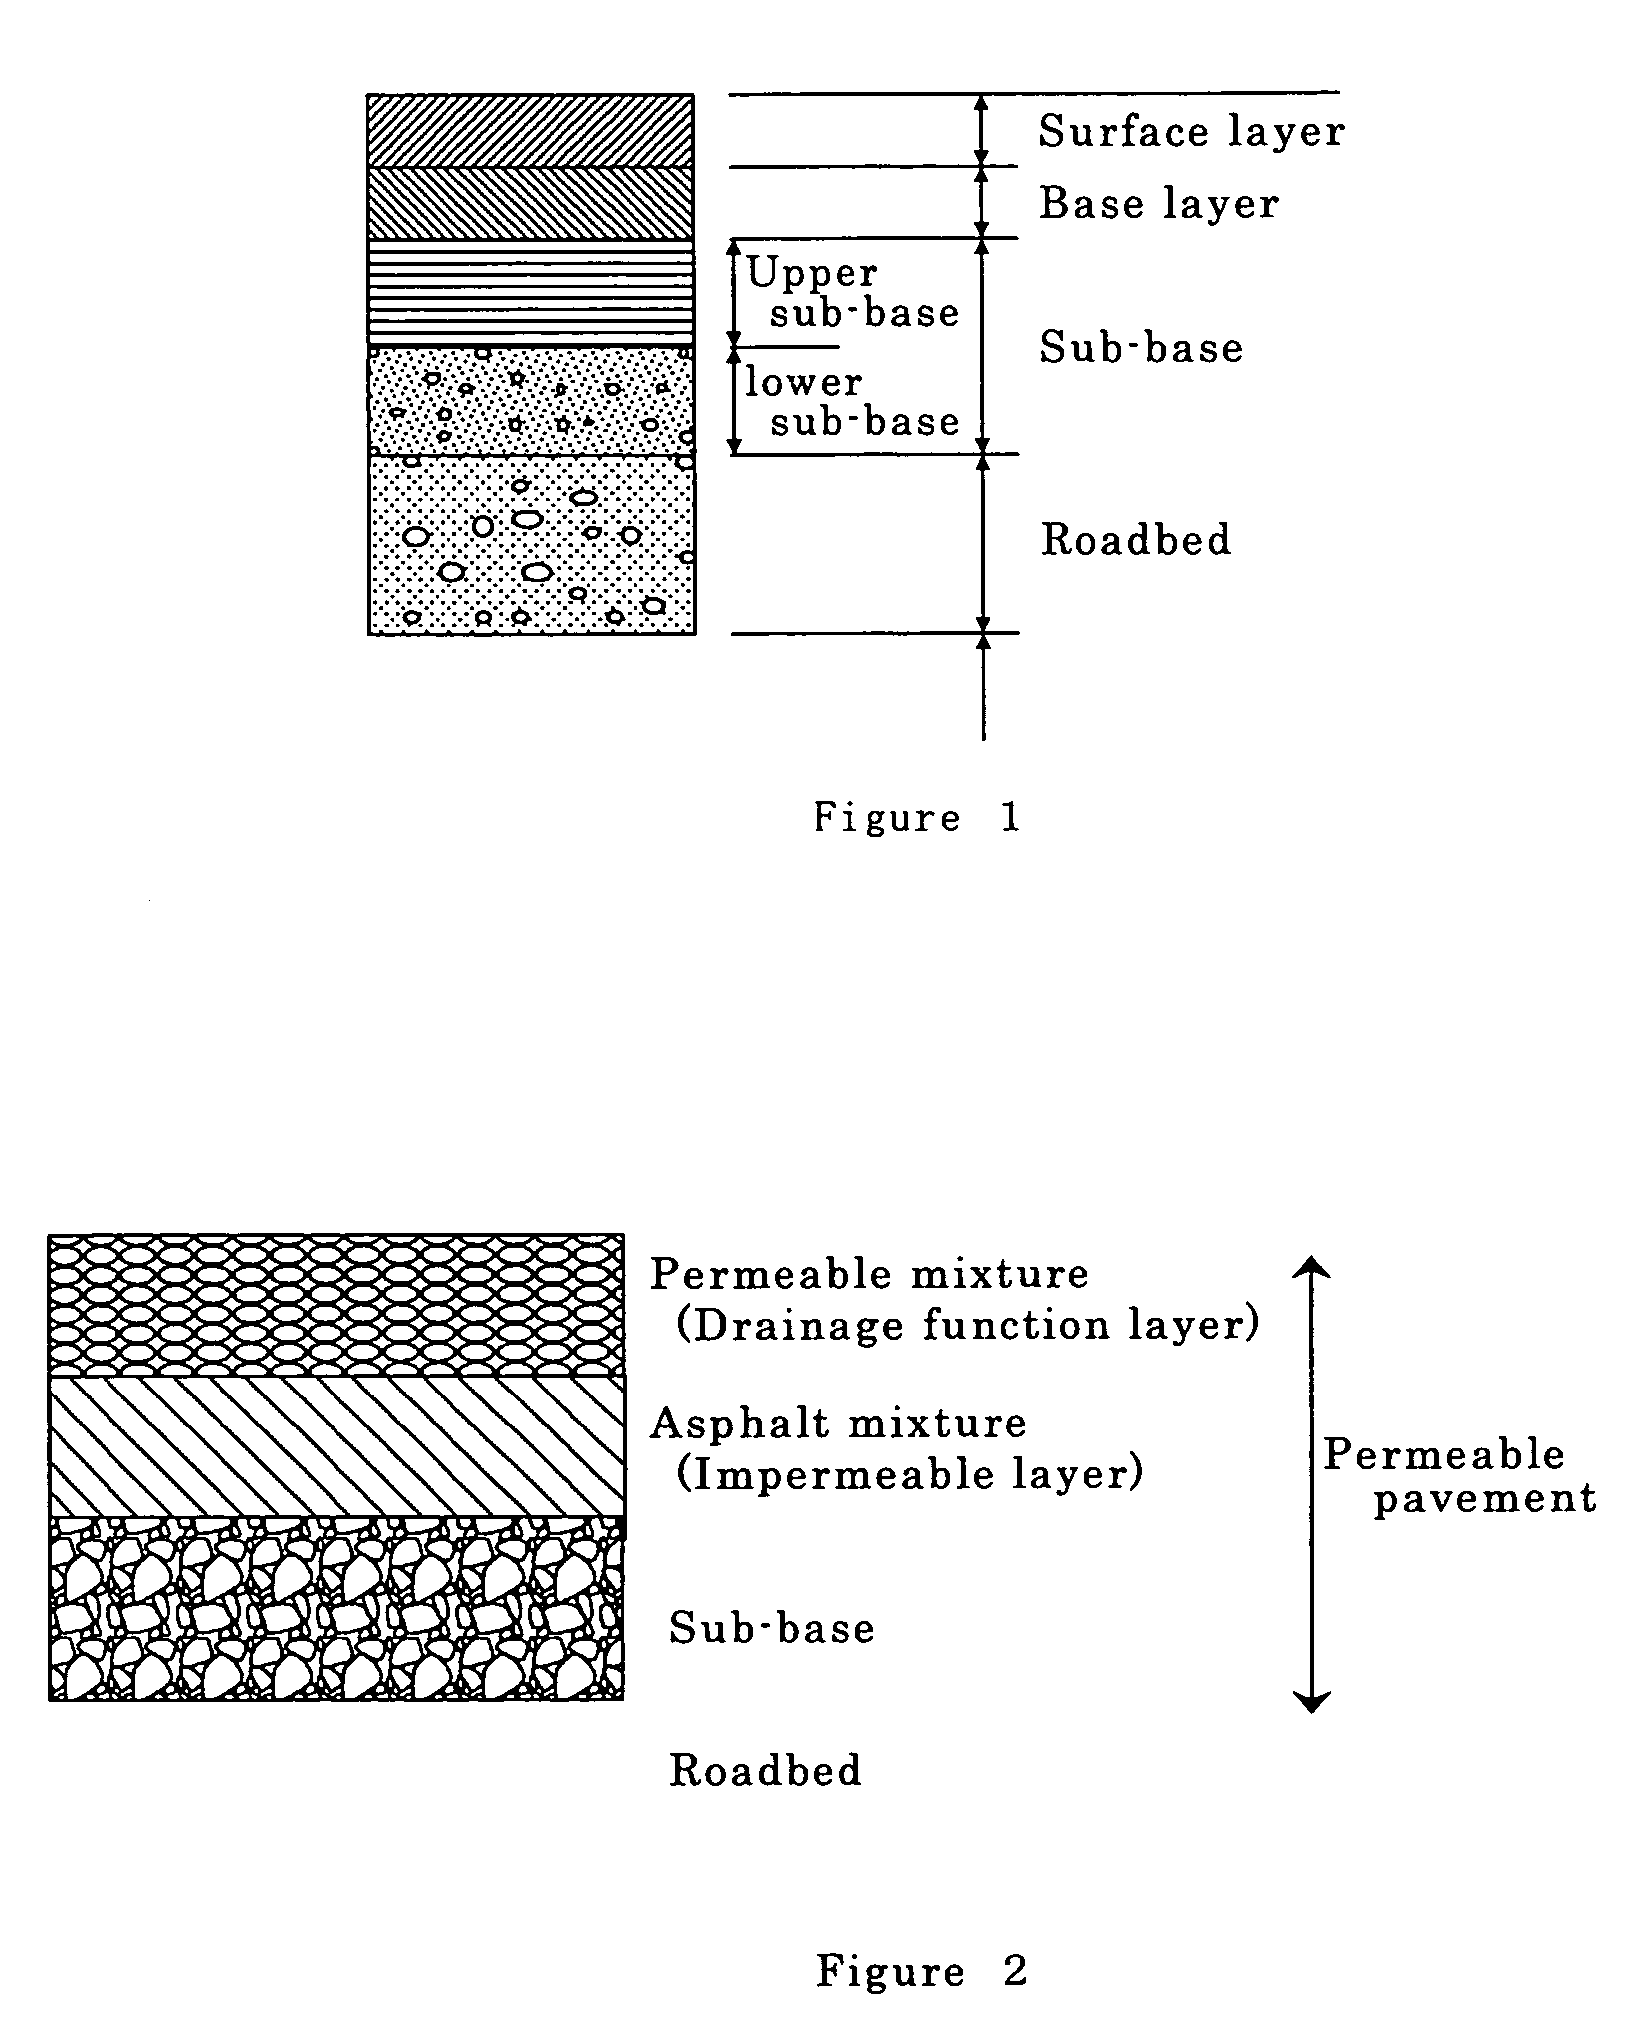 Method for continuous on-site recycling of an asphalt mixture layer of a pavement and a motor-driven vehicle system therefor